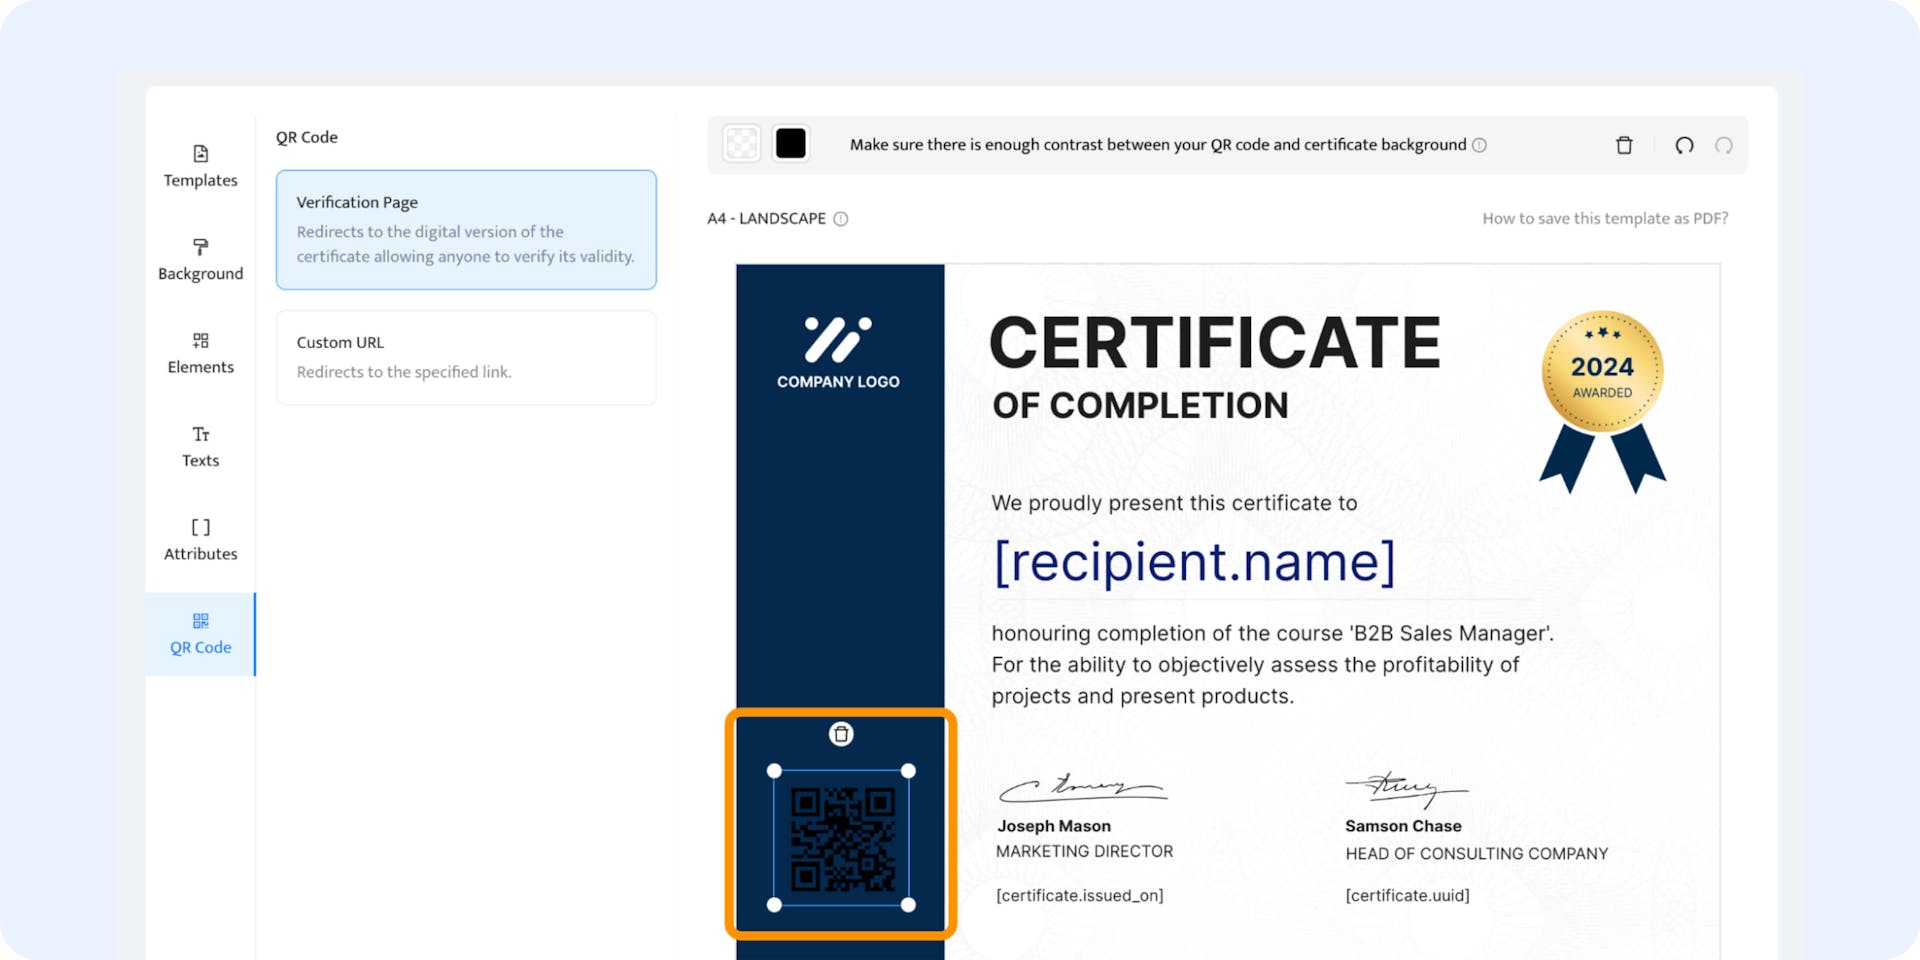 Adding the QR code on the certificate to the verification page.